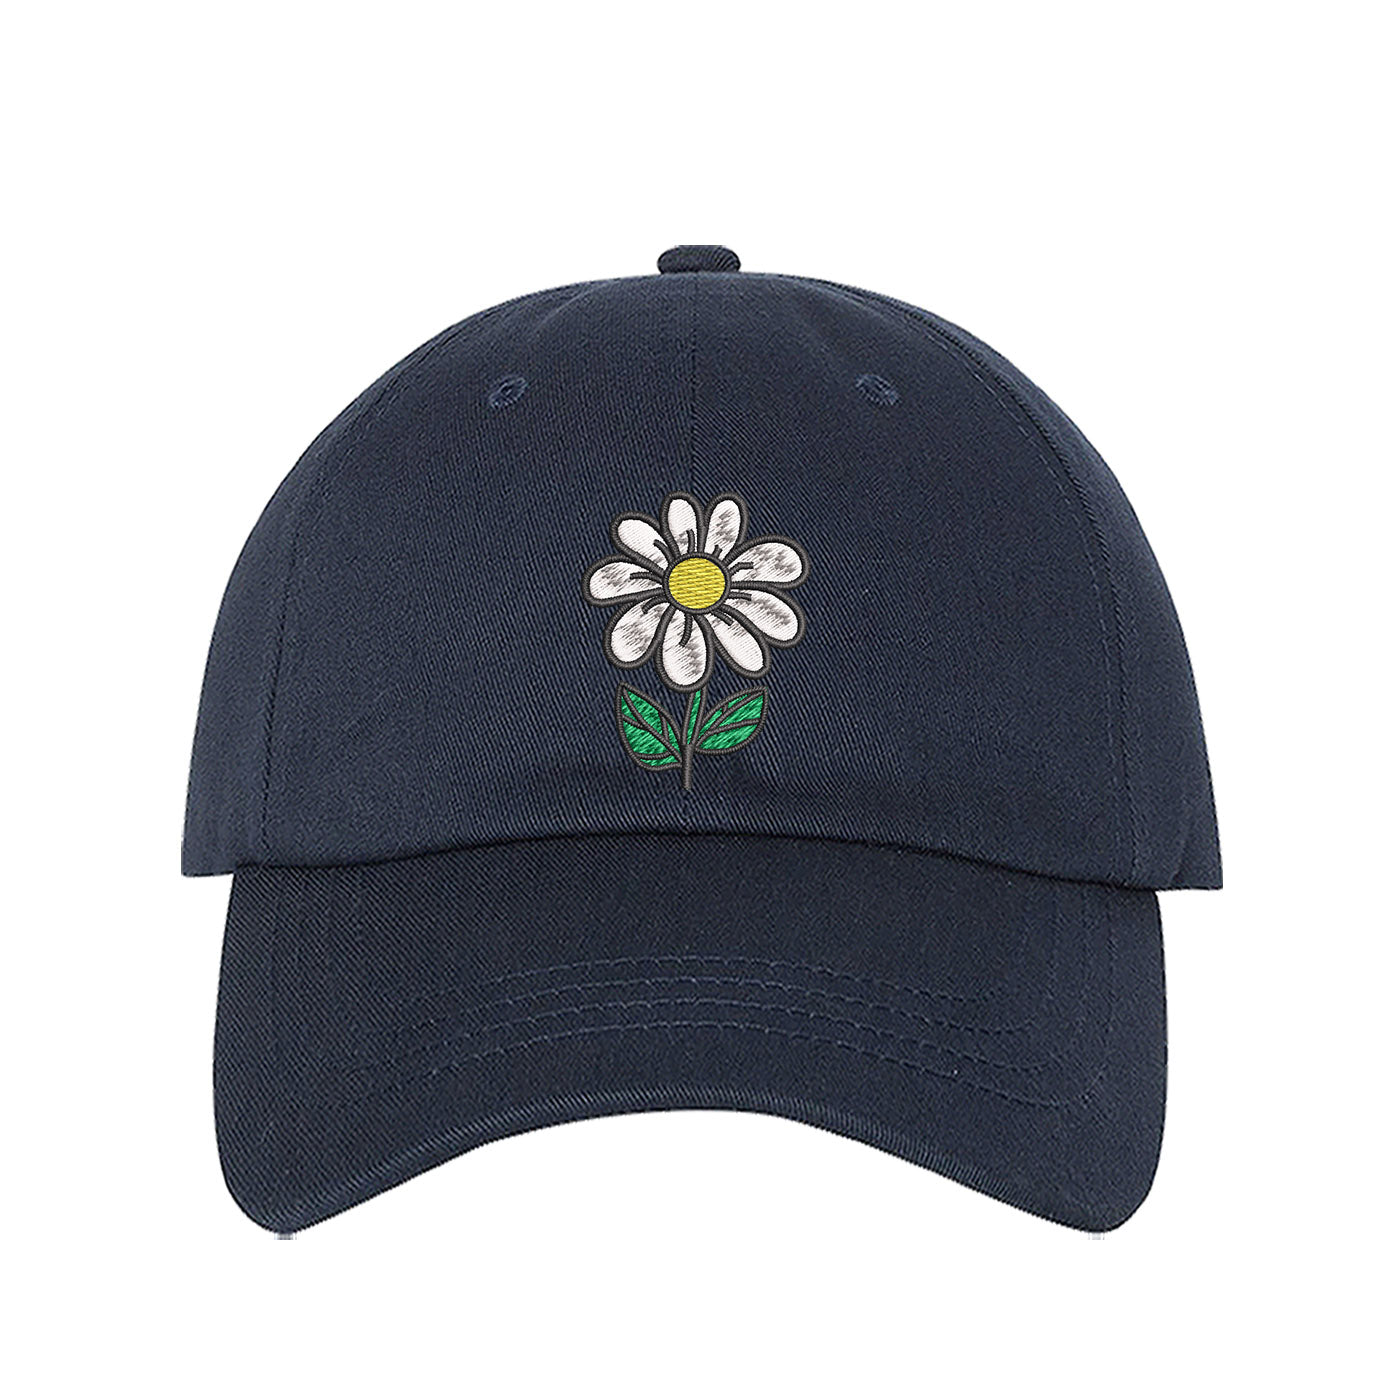 Navy Blue Baseball Cap embroidered with a daisy flower with stem - DSY Lifestyle